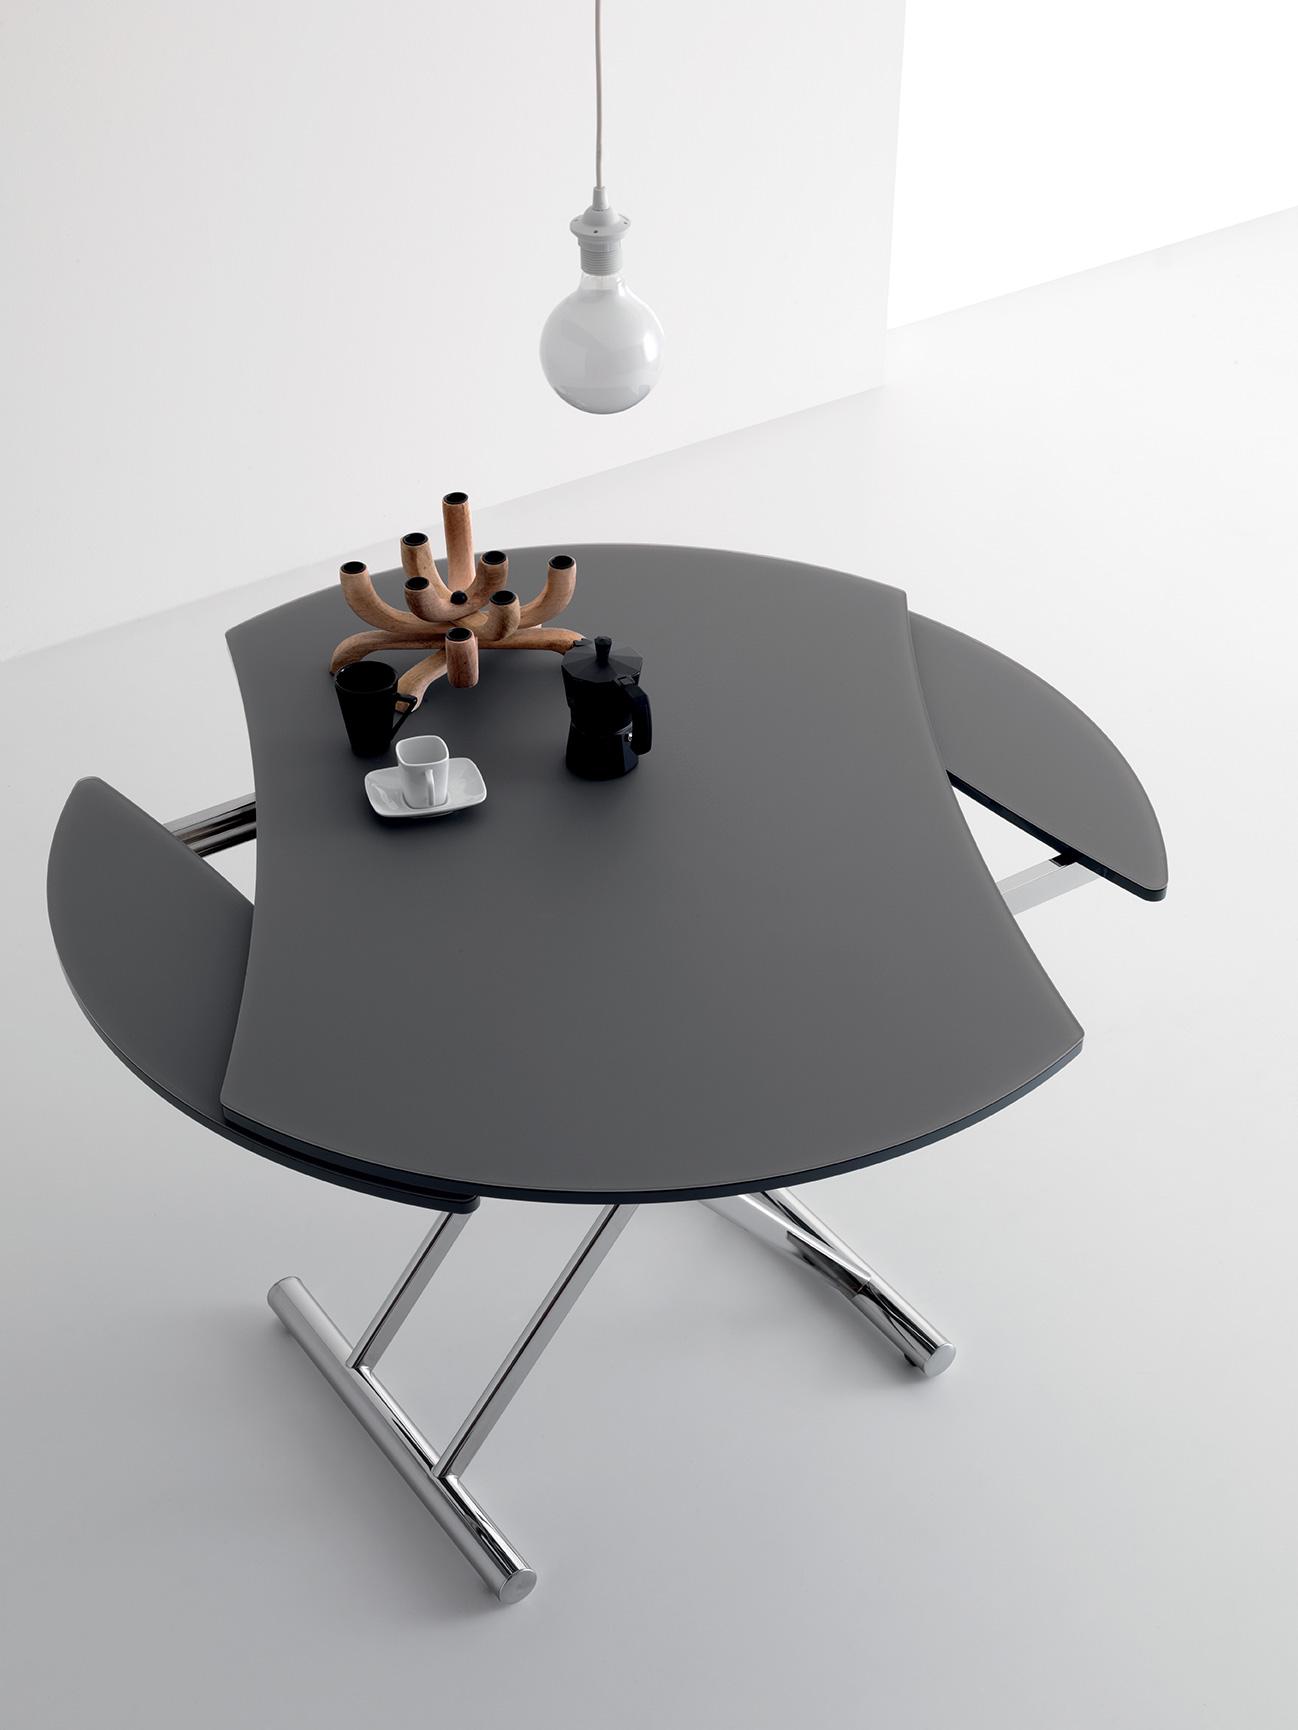 Up and Down table is designed for those who love dynamic shapes. Discover our adjustable height coffee table, attractive items of furniture that are sturdy and durable.